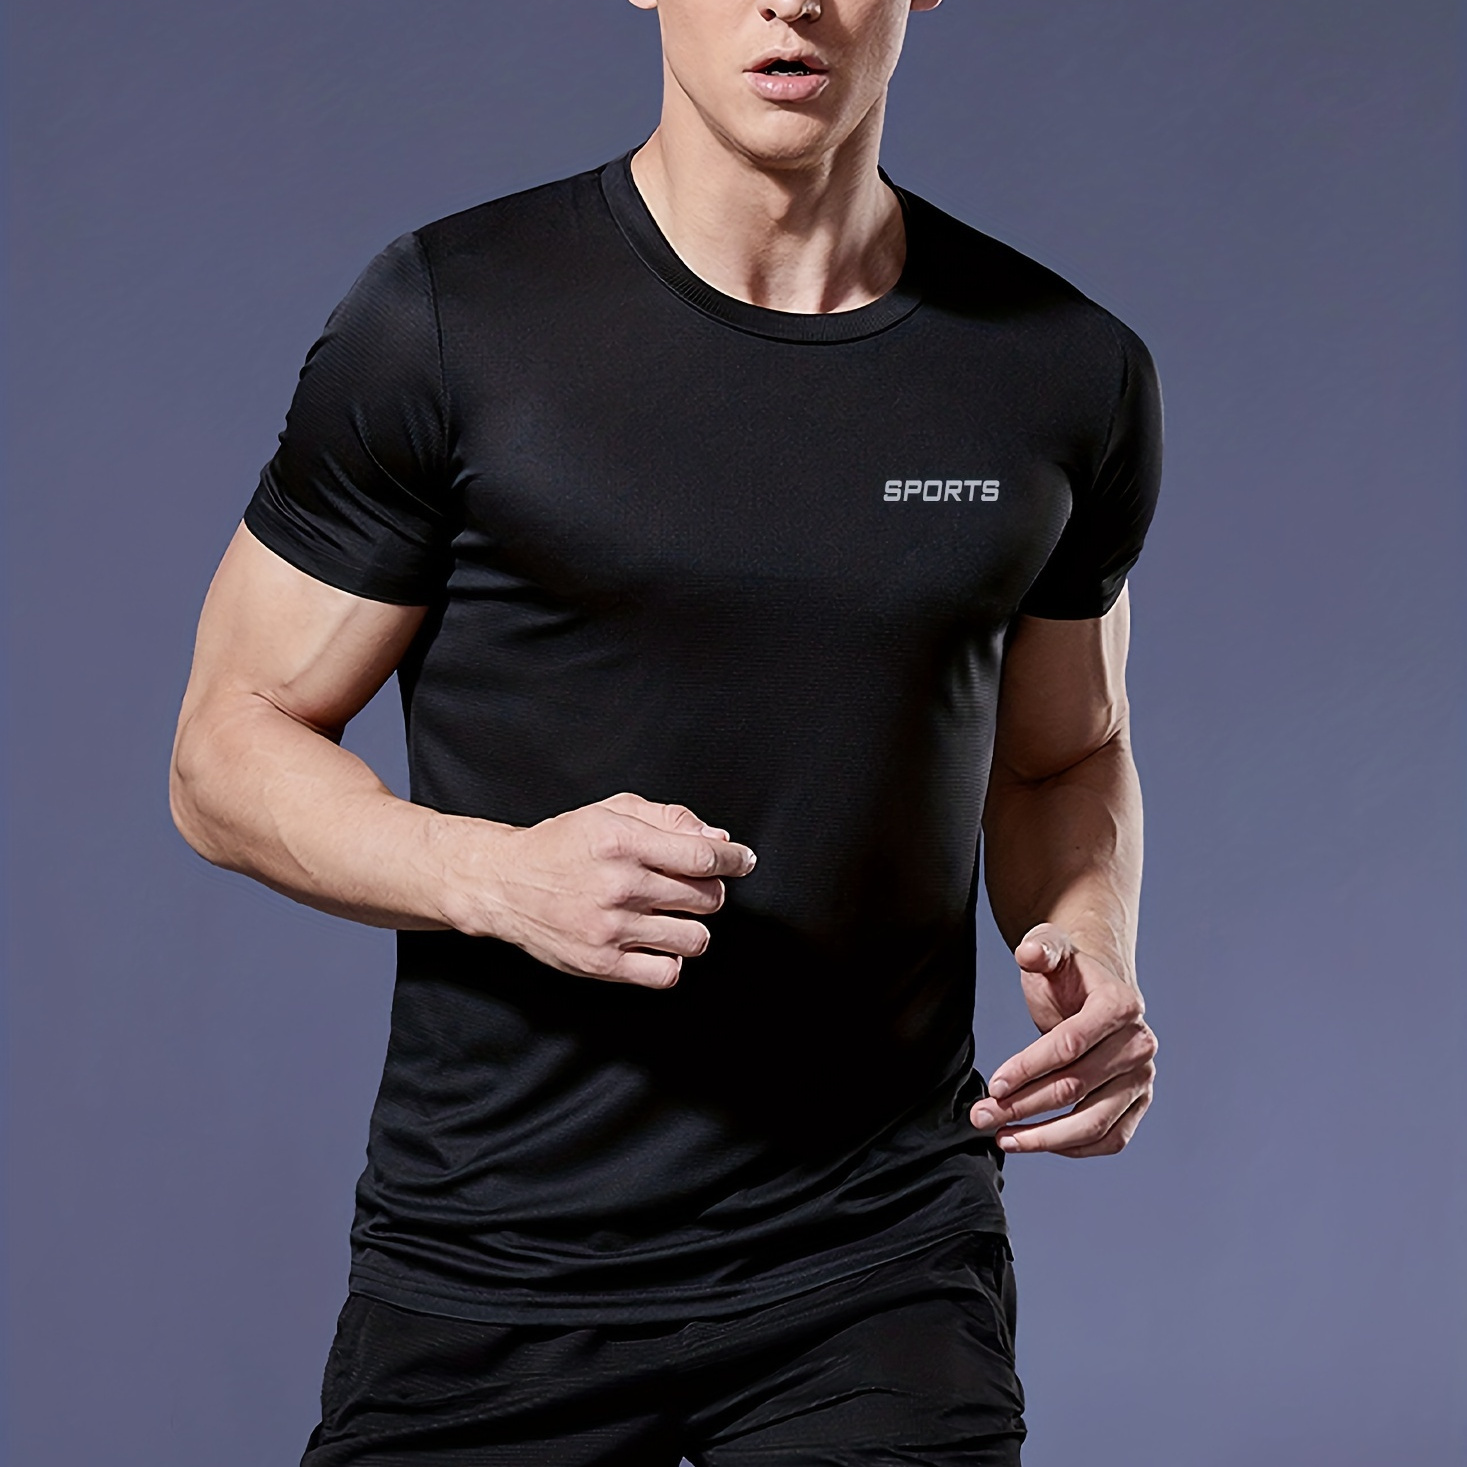 

Men's Solid Color Ultralight Quick Dry Sport T-shirt, Breathable Lightweight Top For Fitness Training Workout Running Gym